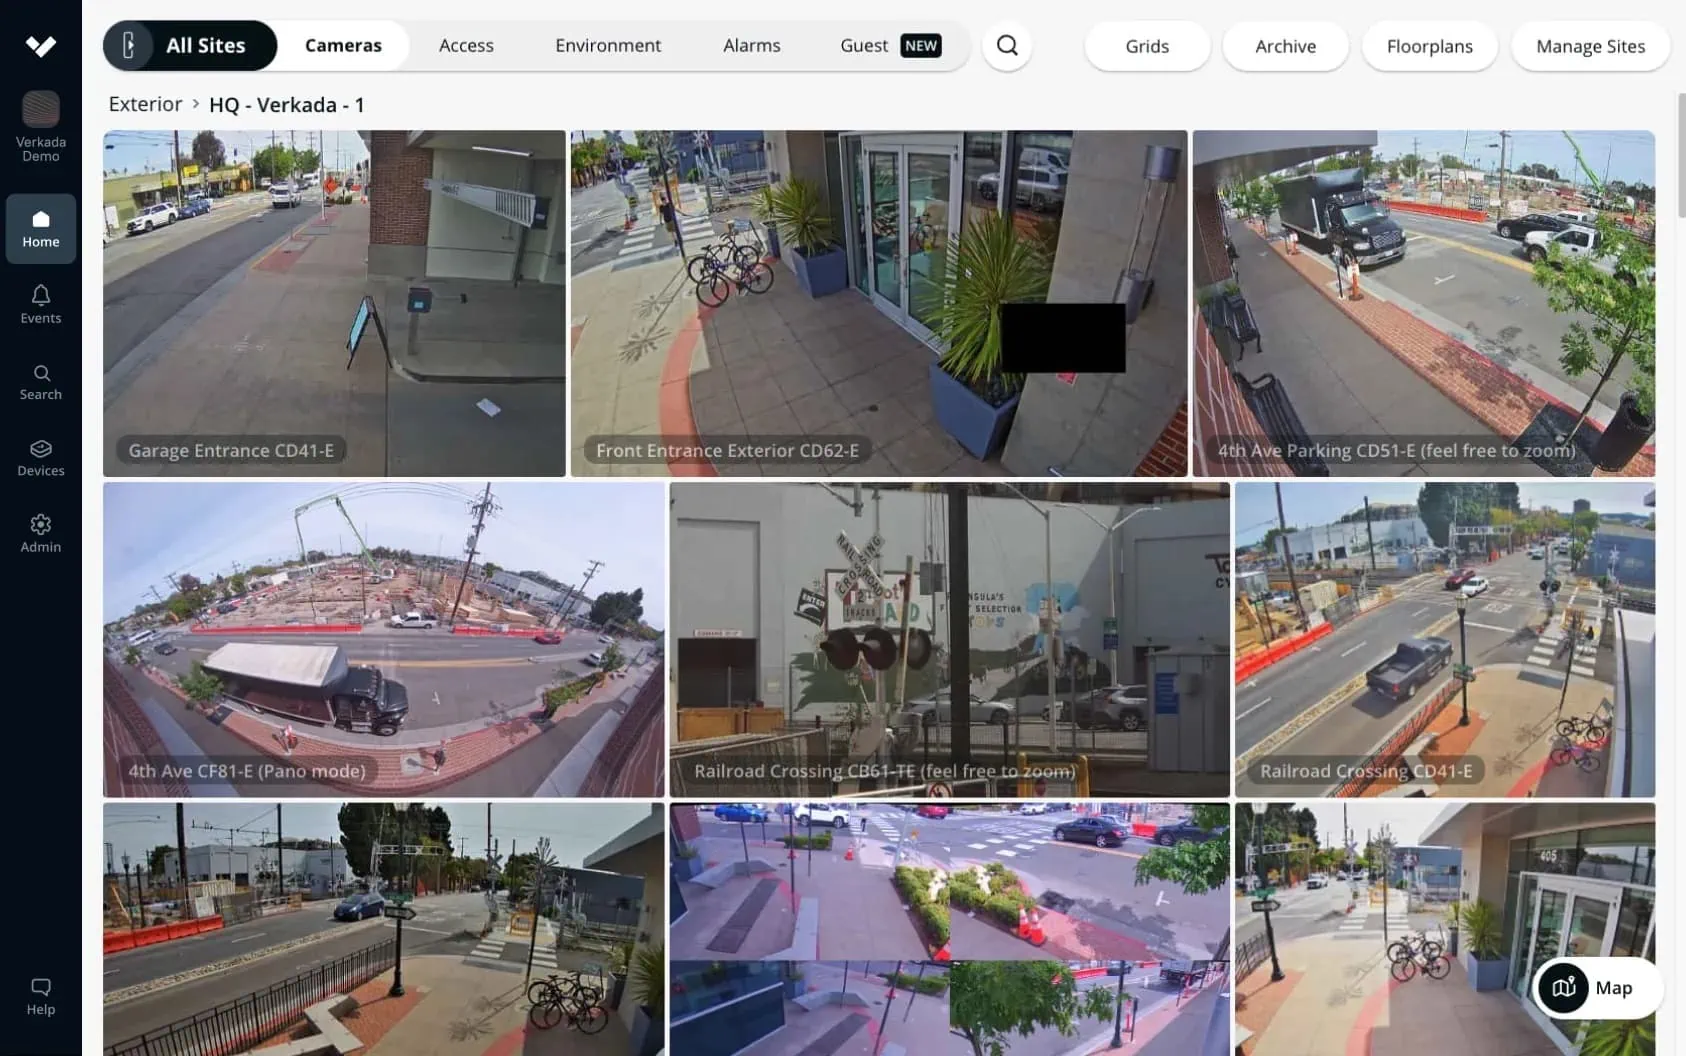 Footage from security cameras of a Sacramento business displayed on the Command interface